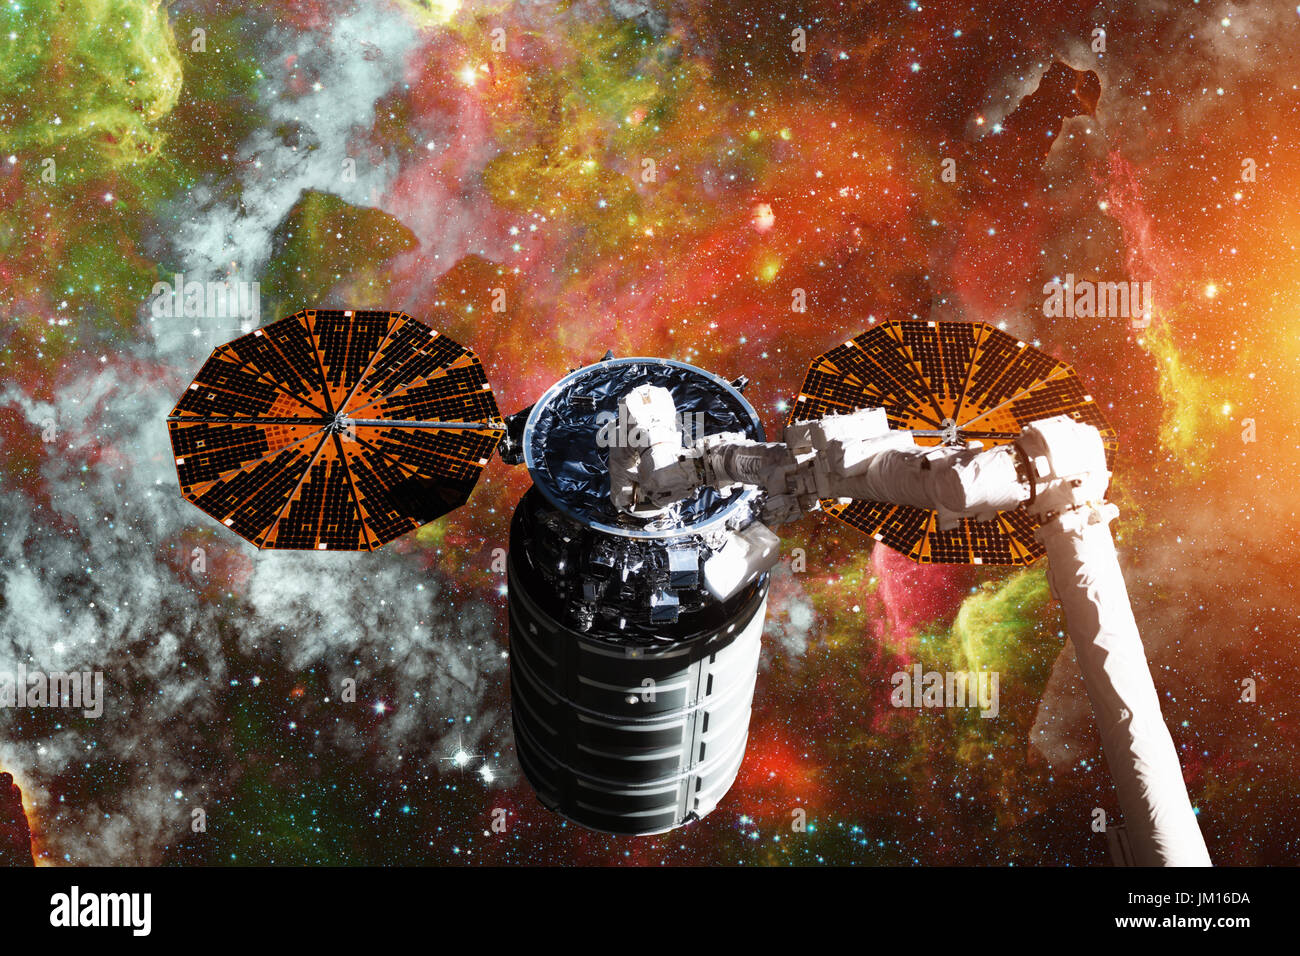 Cargo spacecraft - The Automated Transfer Vehicle over spiral galaxy. Elements of this image furnished by NASA. Stock Photo